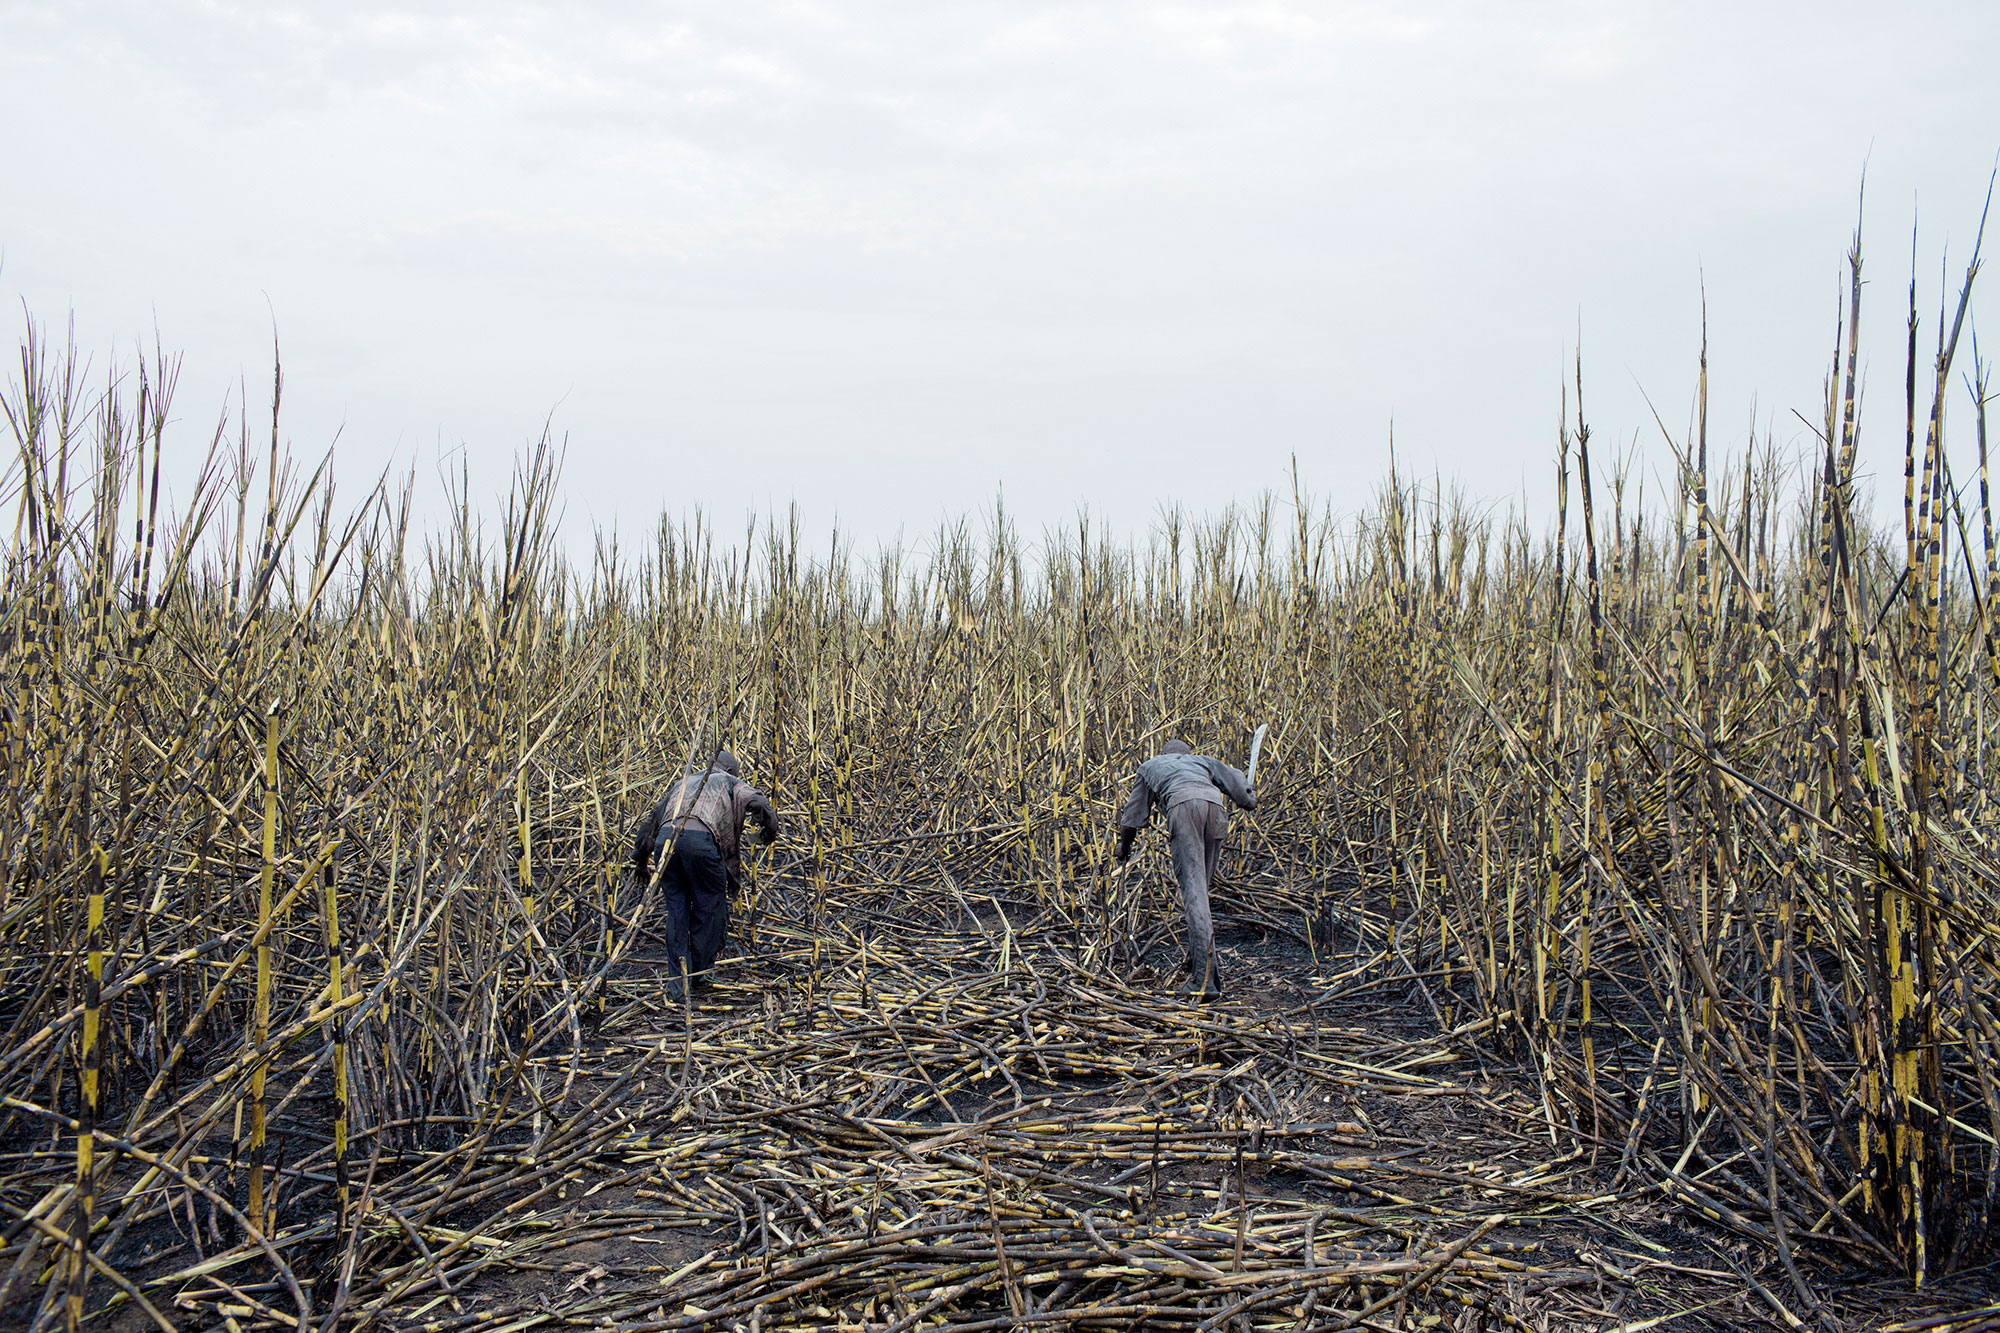 Sugarcane cutters working for the company Sucrerie centrafricaine (SUCAF) in Ngakobo.